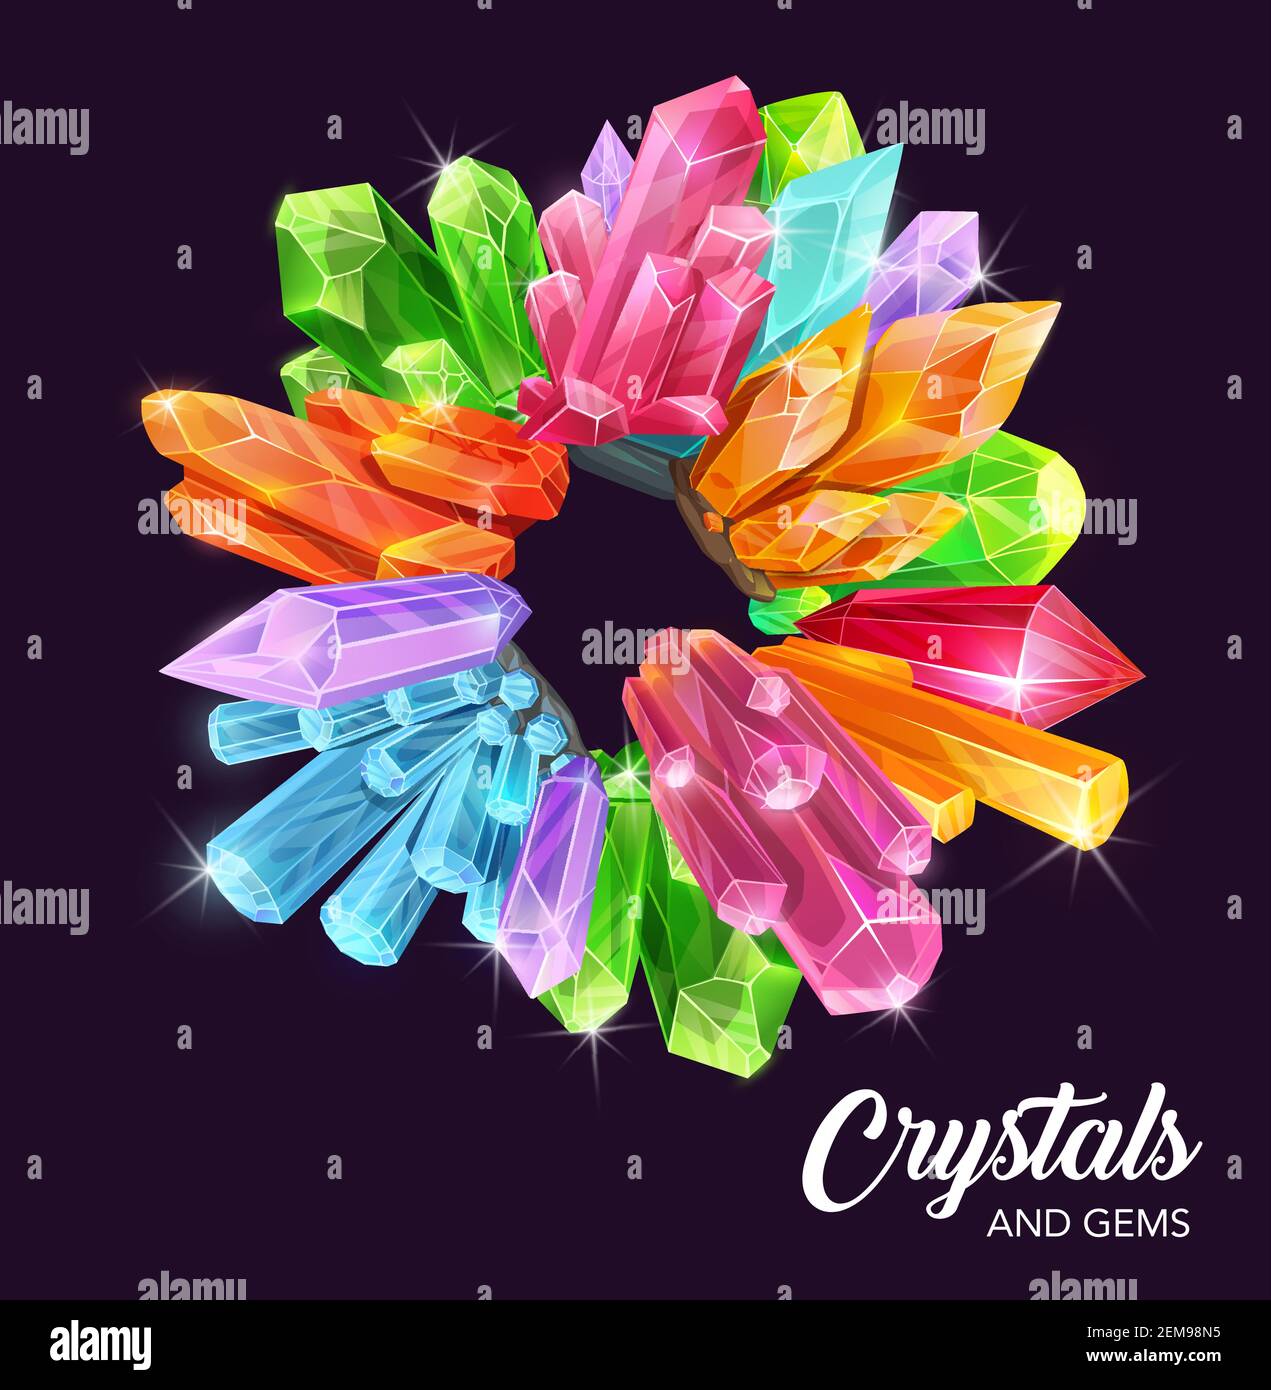 Crystals and gem stones vector wreath with magic and precious gemstones, mineral rocks. Diamond jewels, pink quartz and green emerald, blue sapphire, Stock Vector